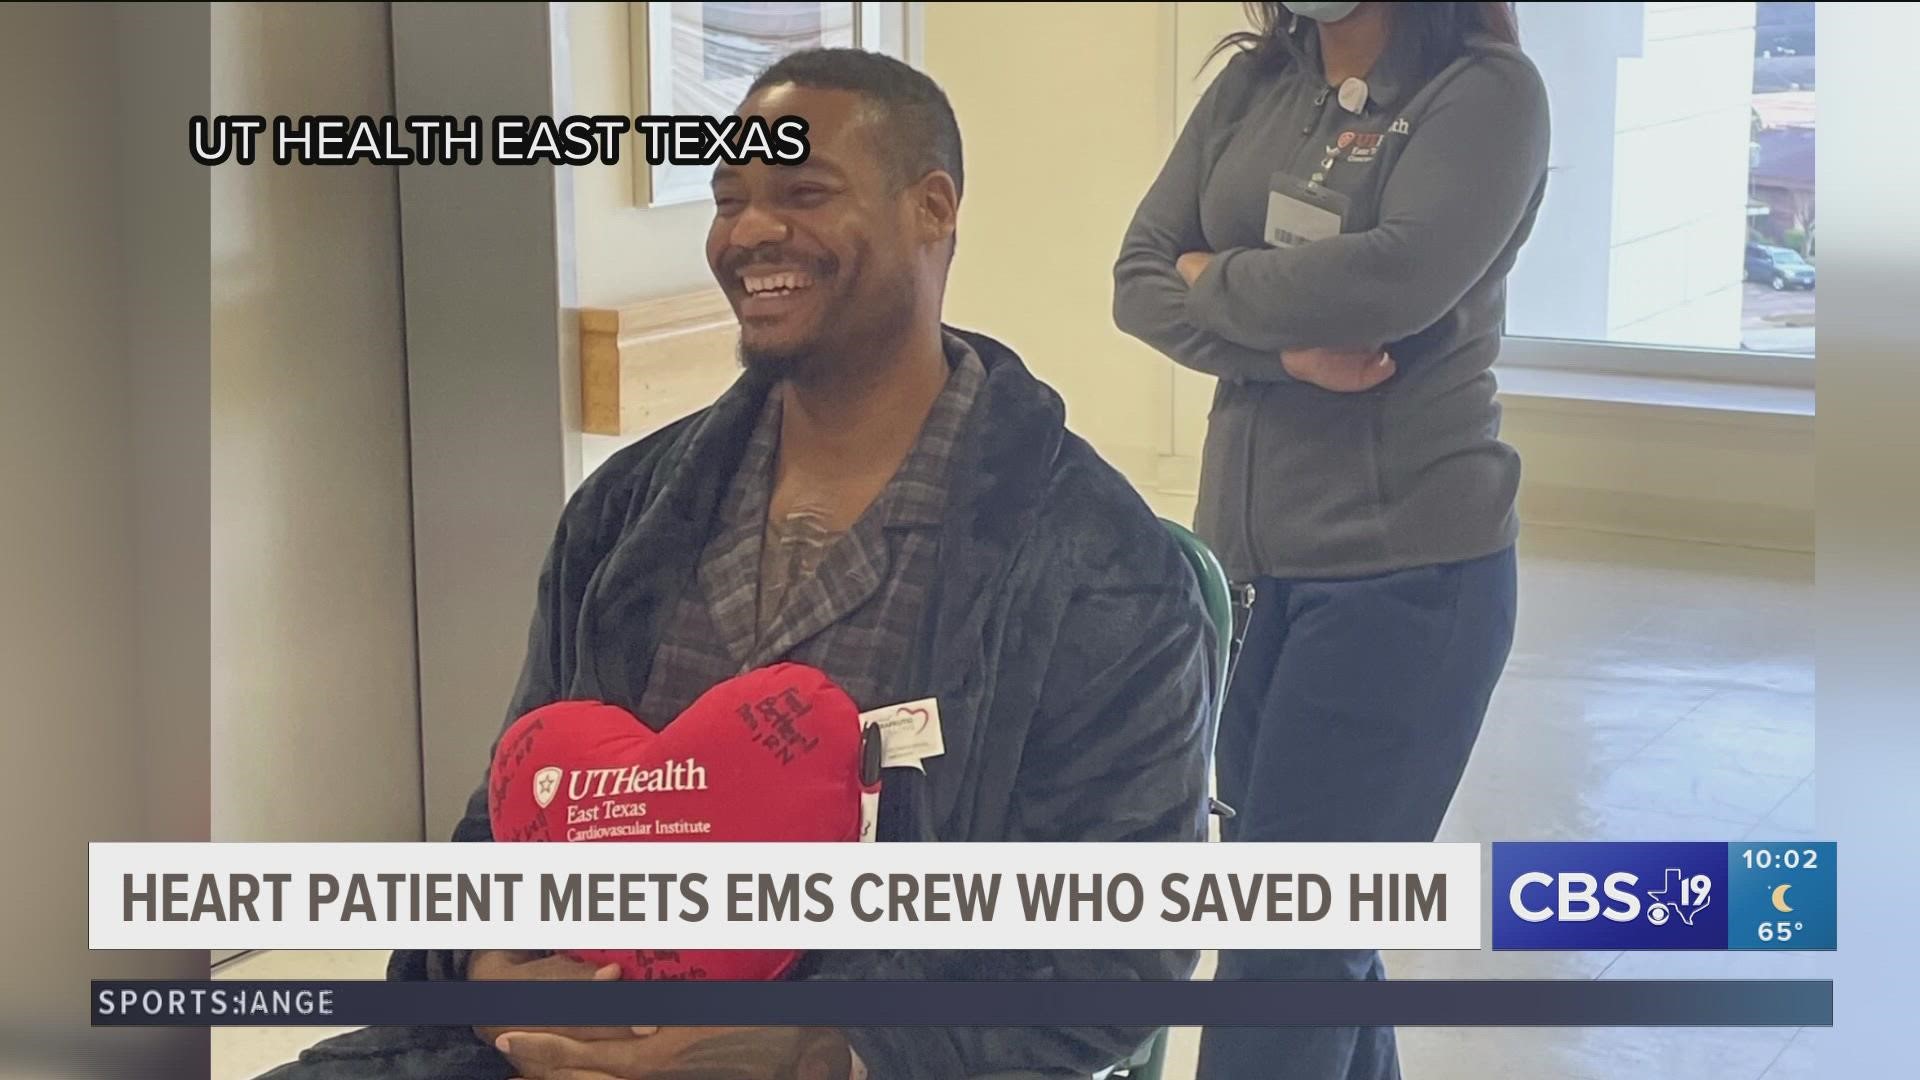 Heart patient meets EMS crew who saved his life